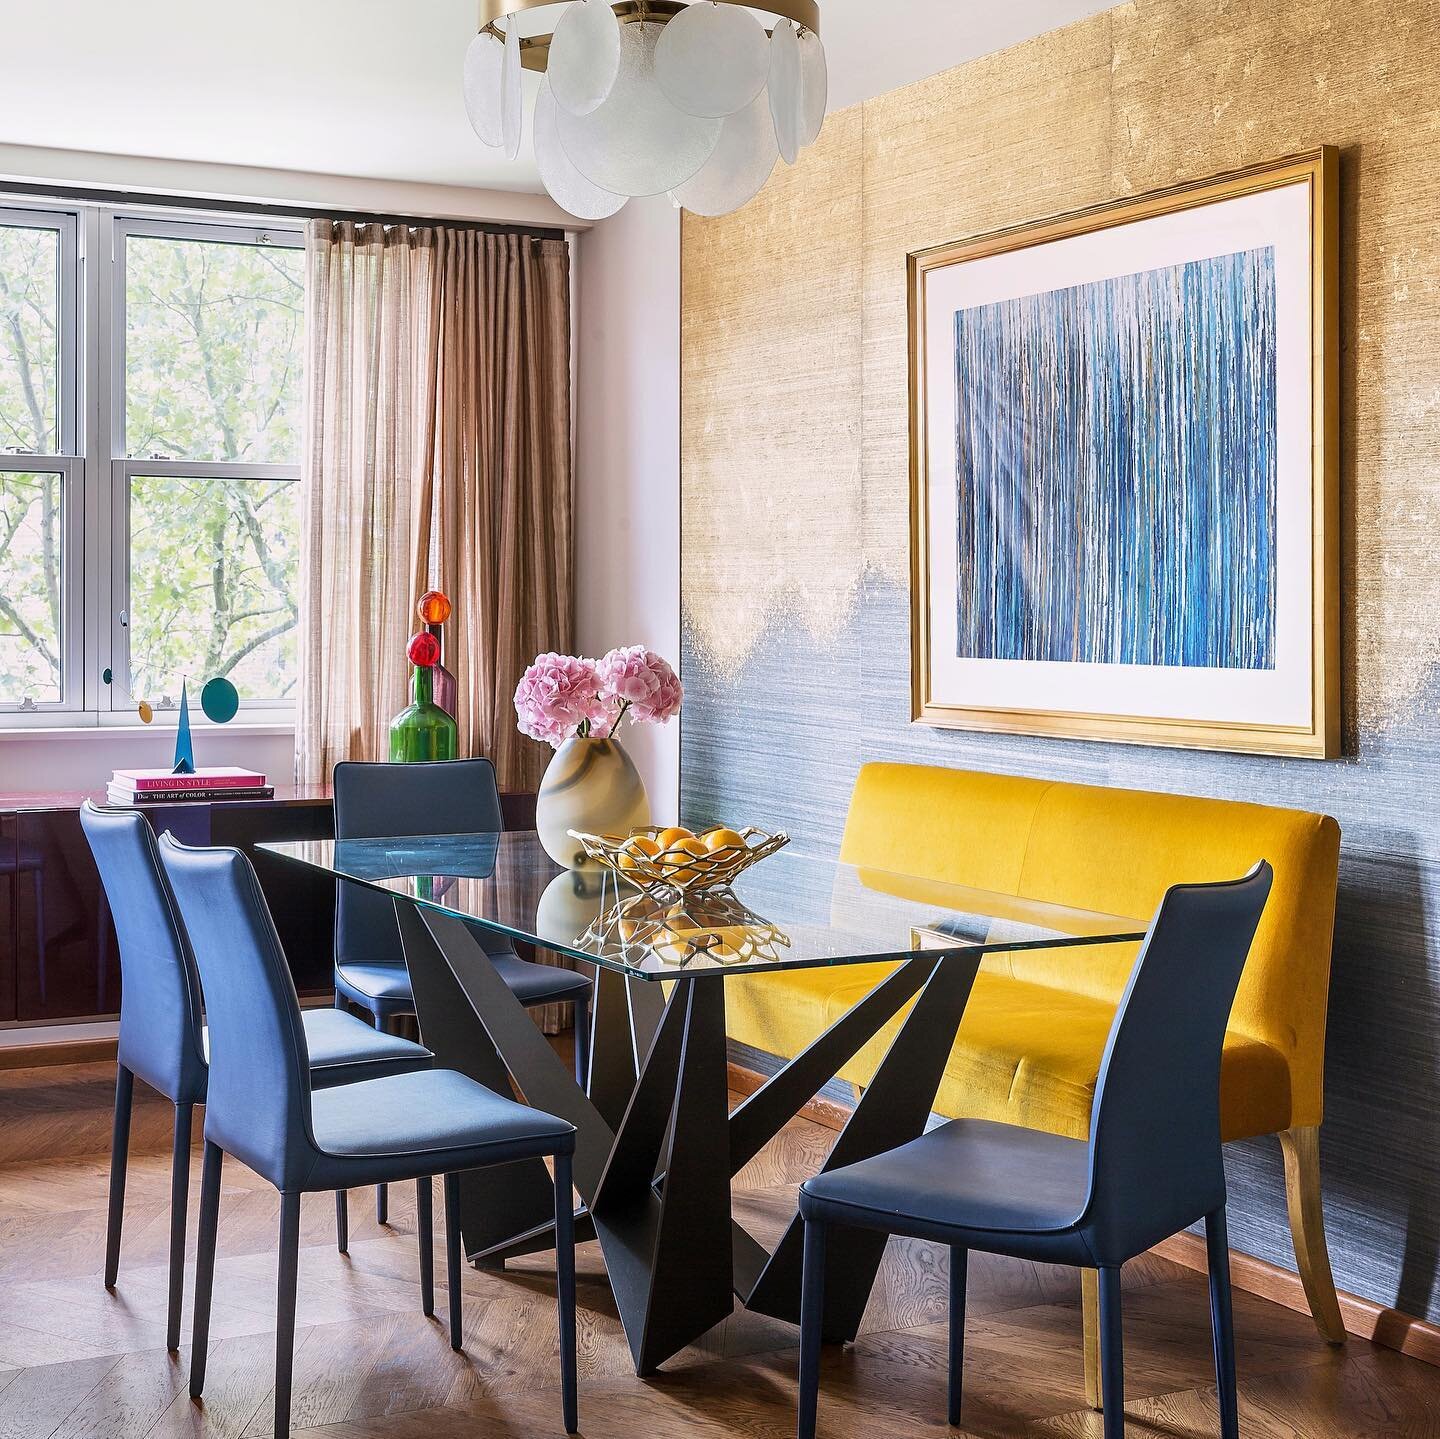 Modernity &amp; glamour meet warmth &amp; functionality in this compact London apartment designed by @kirangala_and_associates. So glad to be part of this super Lux project @interworldfurnishing 

@archdigestindia @archdigest @homejournal @luxecodema